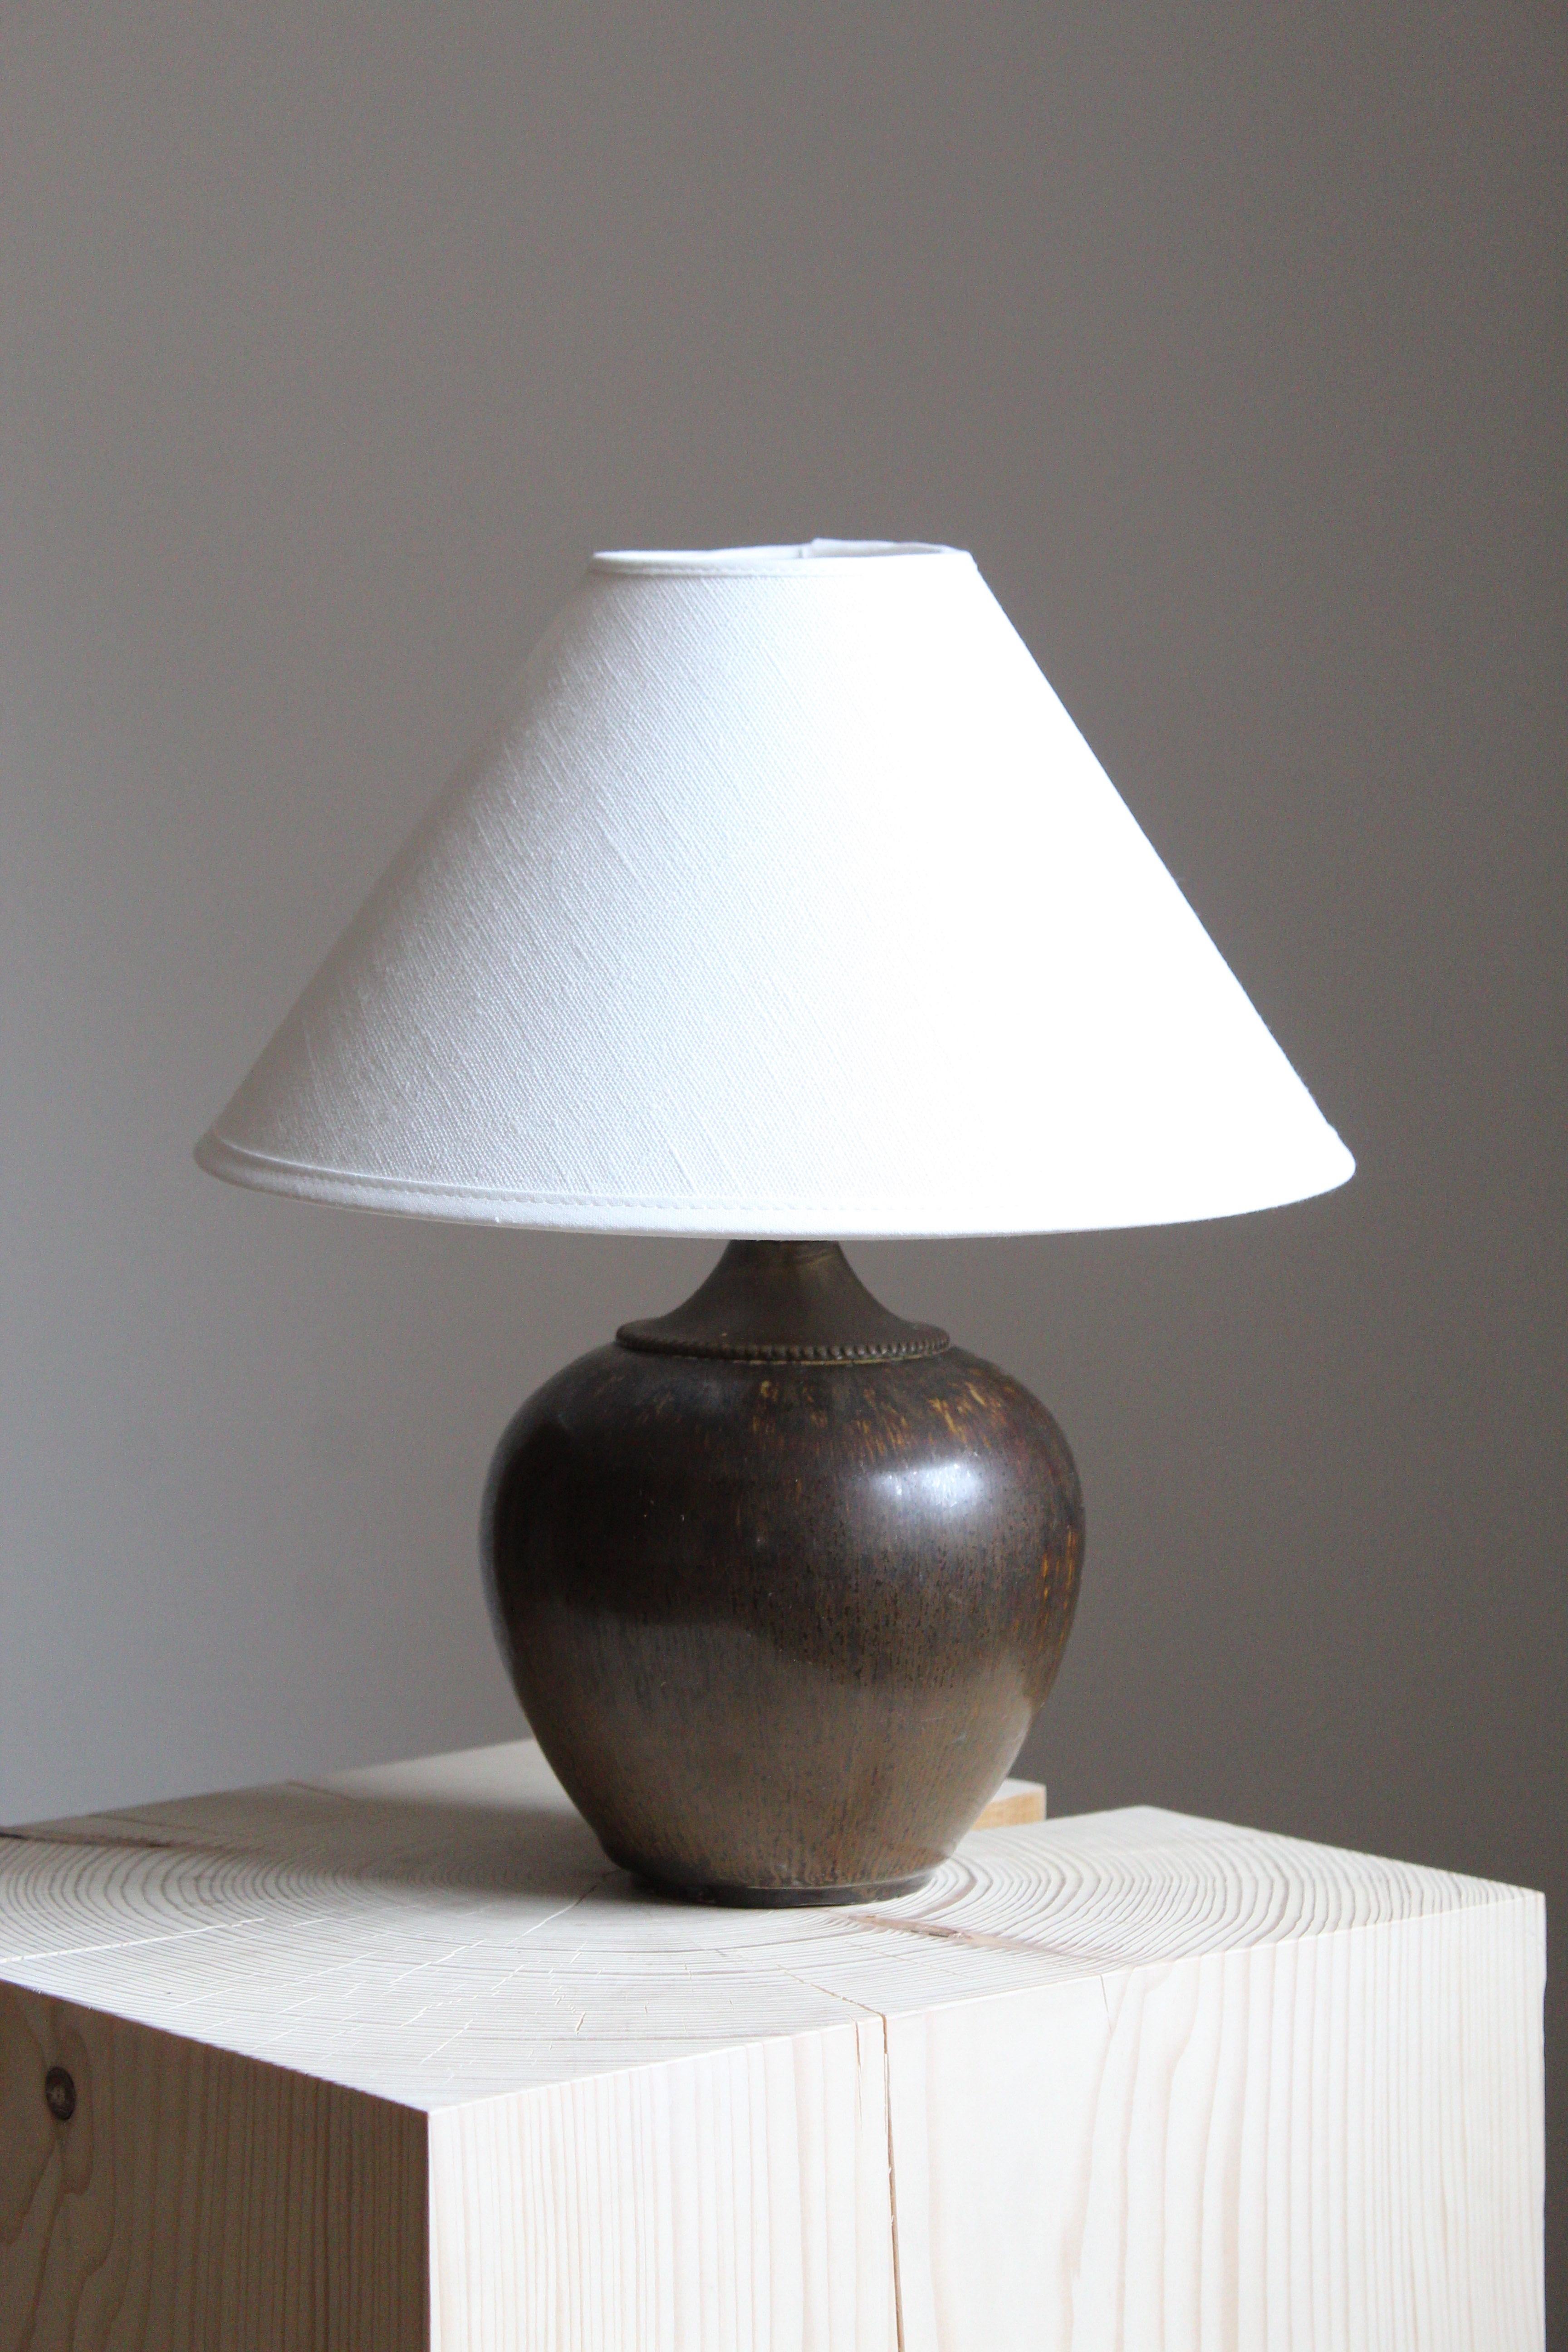 A table lamp, produced by Saxbo, Denmark, 1950s. Possibly designed by Eva Stæhr-Nielsen. Sold without lampshade.

Other designers of the period include Gunnar Nylund, Axel Salto, Carl-Harry Stålhane, Wilhelm Kåge, and Arne Bang.